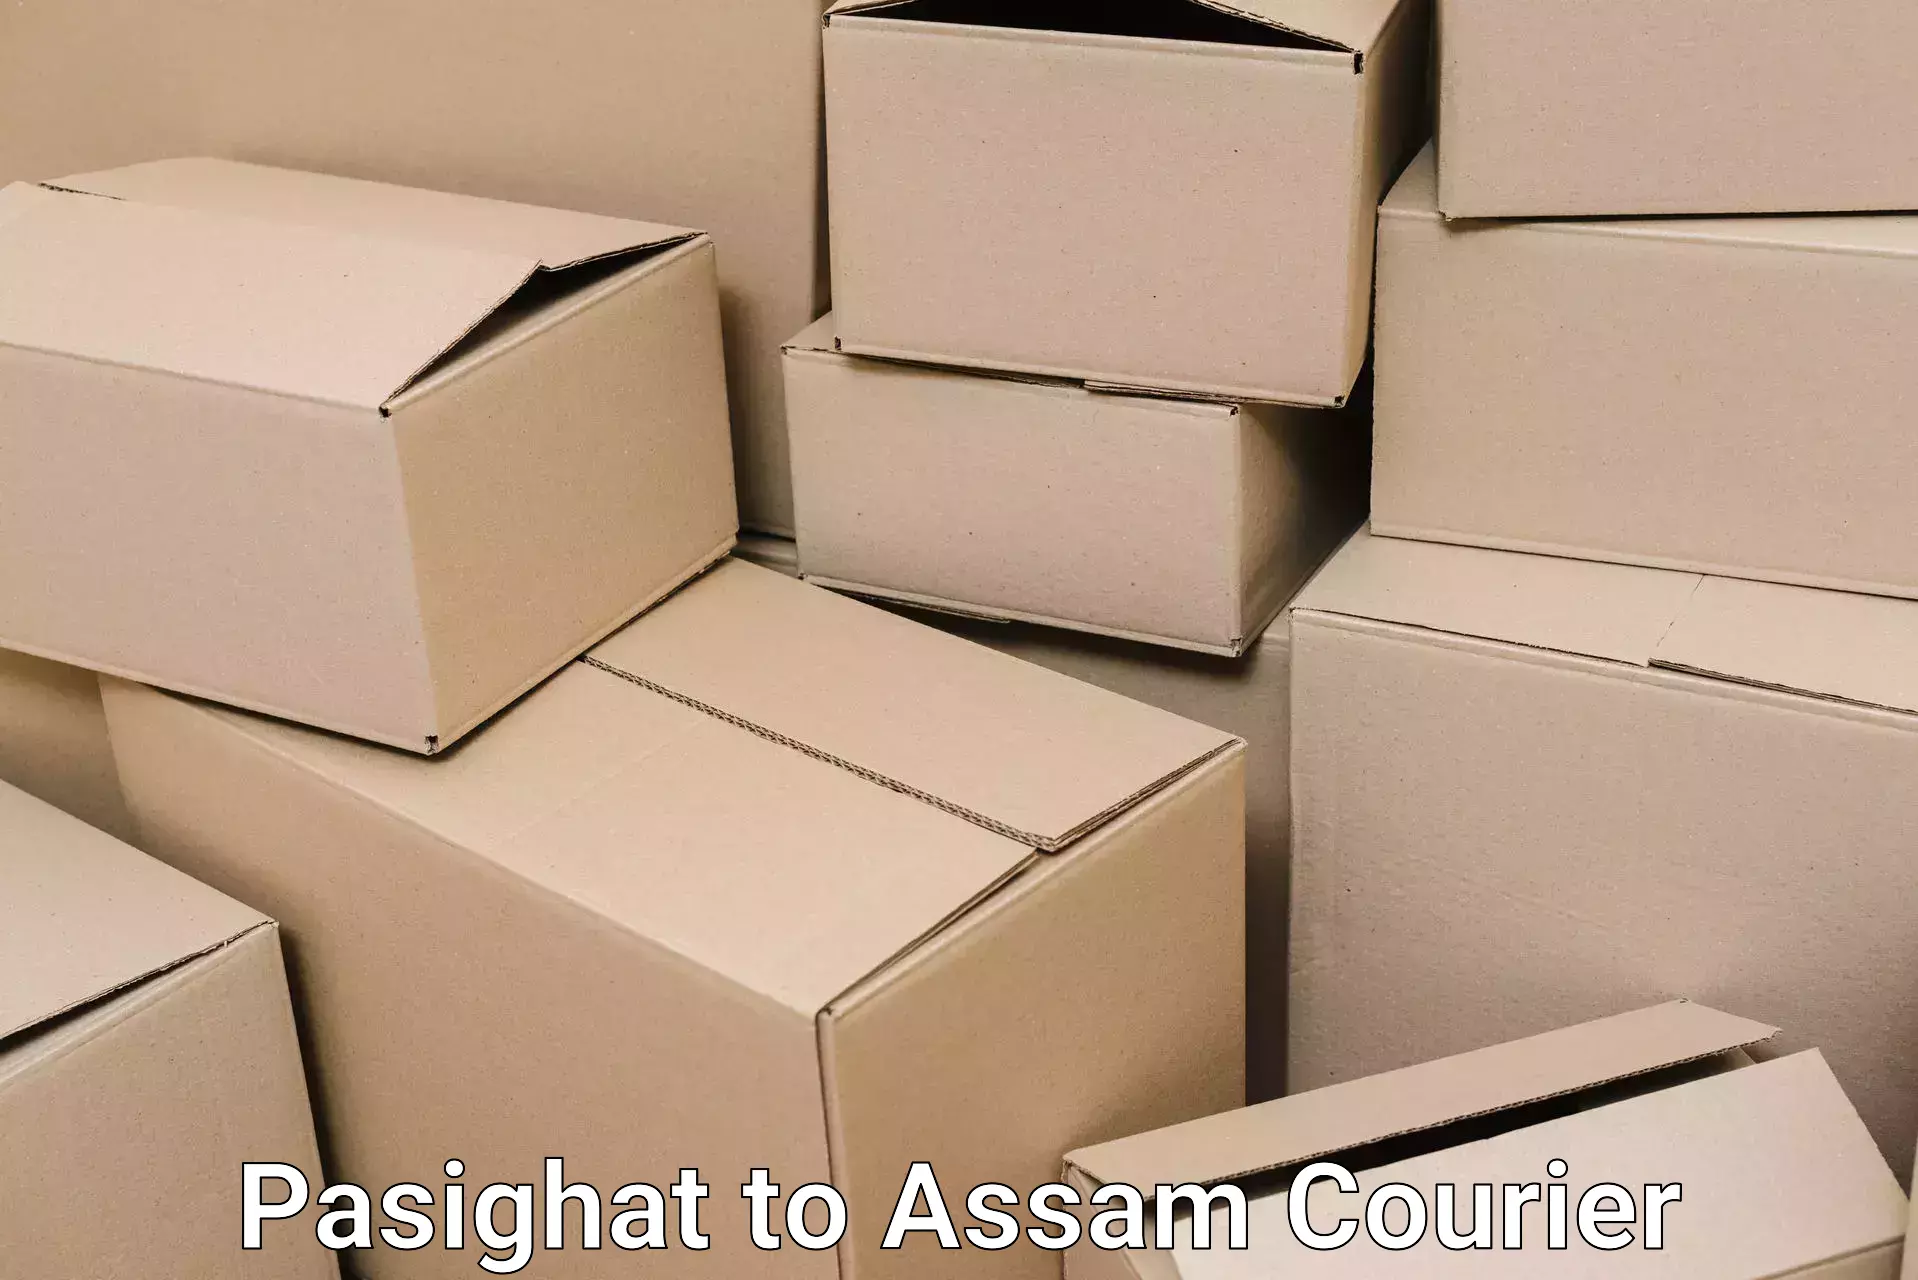 Quality moving company Pasighat to Jorhat